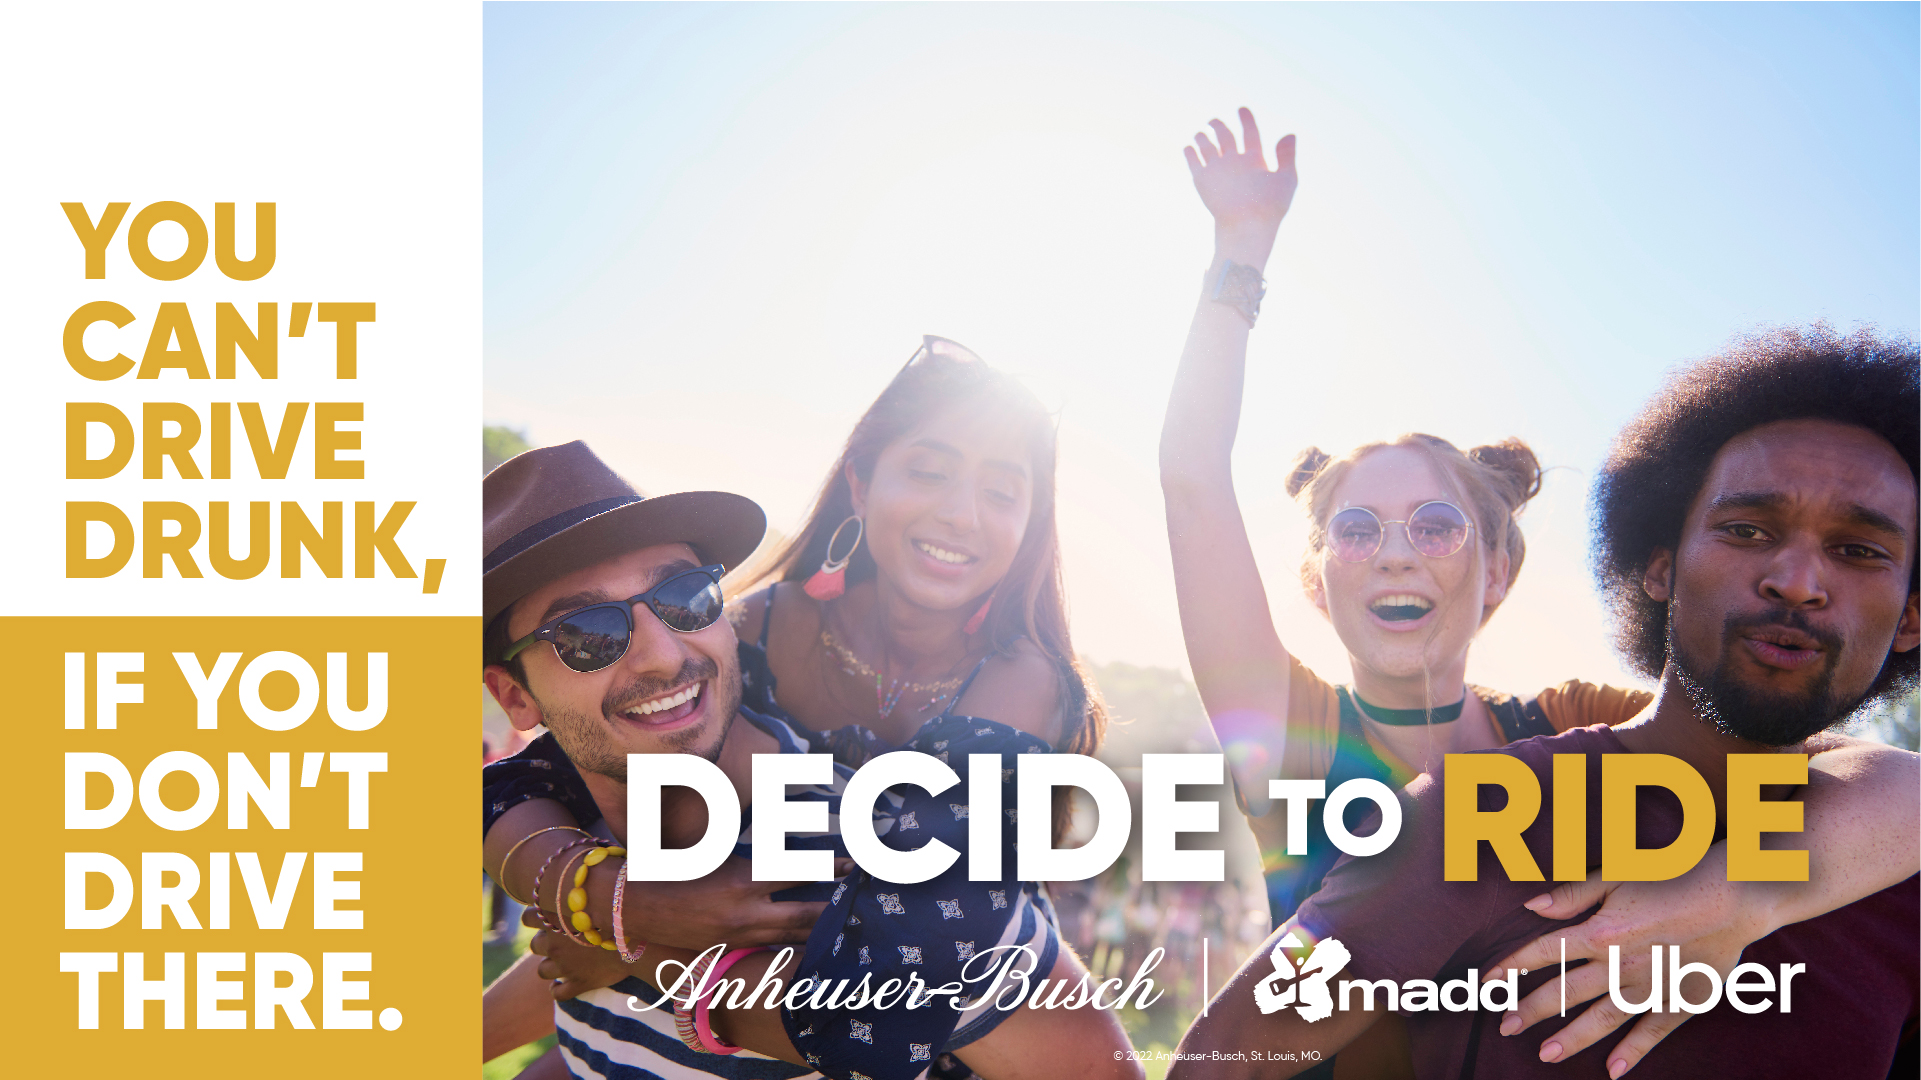 Anheuser-Busch, MADD and Uber Partner to Help Prevent Drunk Driving in Atlanta This Labor Day Through the Decide to Ride Campaign